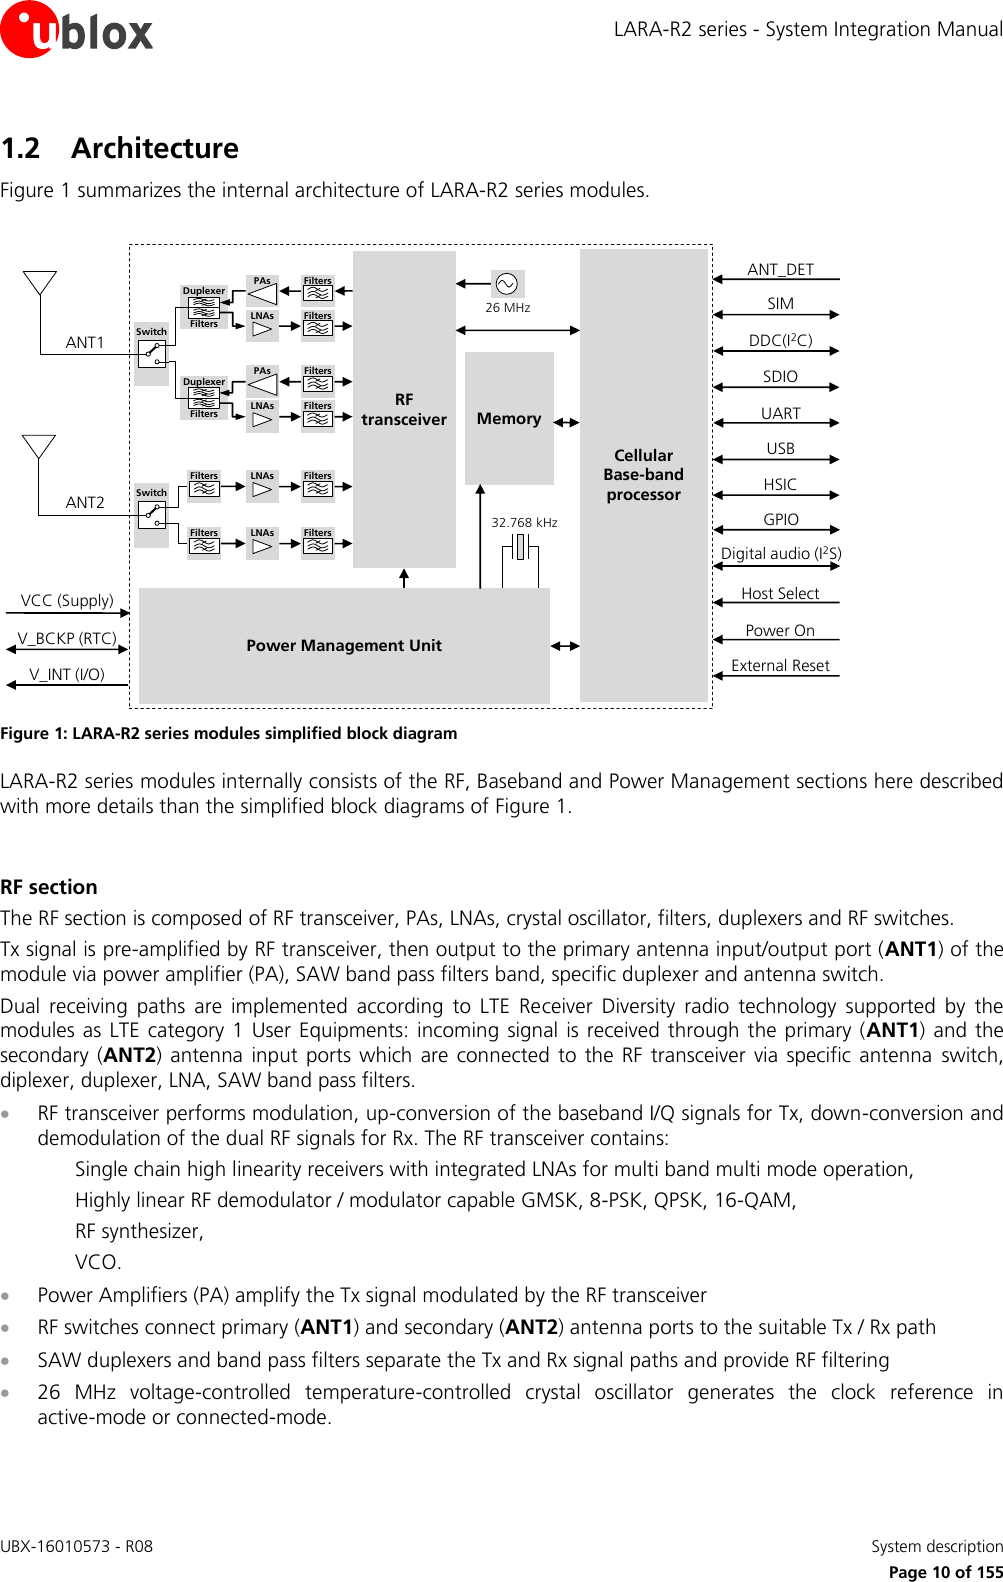 LARA-R2 series - System Integration Manual UBX-16010573 - R08    System description     Page 10 of 155 1.2 Architecture Figure 1 summarizes the internal architecture of LARA-R2 series modules.  CellularBase-bandprocessorMemoryPower Management Unit26 MHz32.768 kHzANT1RF transceiverANT2V_INT (I/O)V_BCKP (RTC)VCC (Supply)SIMUSBHSICPower OnExternal ResetPAsLNAs FiltersFiltersDuplexerFiltersPAsLNAs FiltersFiltersDuplexerFiltersLNAs FiltersFiltersLNAs FiltersFiltersSwitchSwitchDDC(I2C)SDIOUARTANT_DETHost SelectGPIODigital audio (I2S) Figure 1: LARA-R2 series modules simplified block diagram LARA-R2 series modules internally consists of the RF, Baseband and Power Management sections here described with more details than the simplified block diagrams of Figure 1.  RF section The RF section is composed of RF transceiver, PAs, LNAs, crystal oscillator, filters, duplexers and RF switches. Tx signal is pre-amplified by RF transceiver, then output to the primary antenna input/output port (ANT1) of the module via power amplifier (PA), SAW band pass filters band, specific duplexer and antenna switch. Dual  receiving  paths  are  implemented  according  to  LTE  Receiver  Diversity  radio  technology  supported  by  the modules as LTE category 1  User Equipments: incoming  signal  is received through the primary (ANT1)  and the secondary  (ANT2) antenna  input  ports which  are  connected  to the  RF transceiver  via specific antenna  switch, diplexer, duplexer, LNA, SAW band pass filters.   RF transceiver performs modulation, up-conversion of the baseband I/Q signals for Tx, down-conversion and demodulation of the dual RF signals for Rx. The RF transceiver contains: Single chain high linearity receivers with integrated LNAs for multi band multi mode operation, Highly linear RF demodulator / modulator capable GMSK, 8-PSK, QPSK, 16-QAM,  RF synthesizer, VCO.  Power Amplifiers (PA) amplify the Tx signal modulated by the RF transceiver   RF switches connect primary (ANT1) and secondary (ANT2) antenna ports to the suitable Tx / Rx path  SAW duplexers and band pass filters separate the Tx and Rx signal paths and provide RF filtering  26  MHz  voltage-controlled  temperature-controlled  crystal  oscillator  generates  the  clock  reference  in active-mode or connected-mode.  